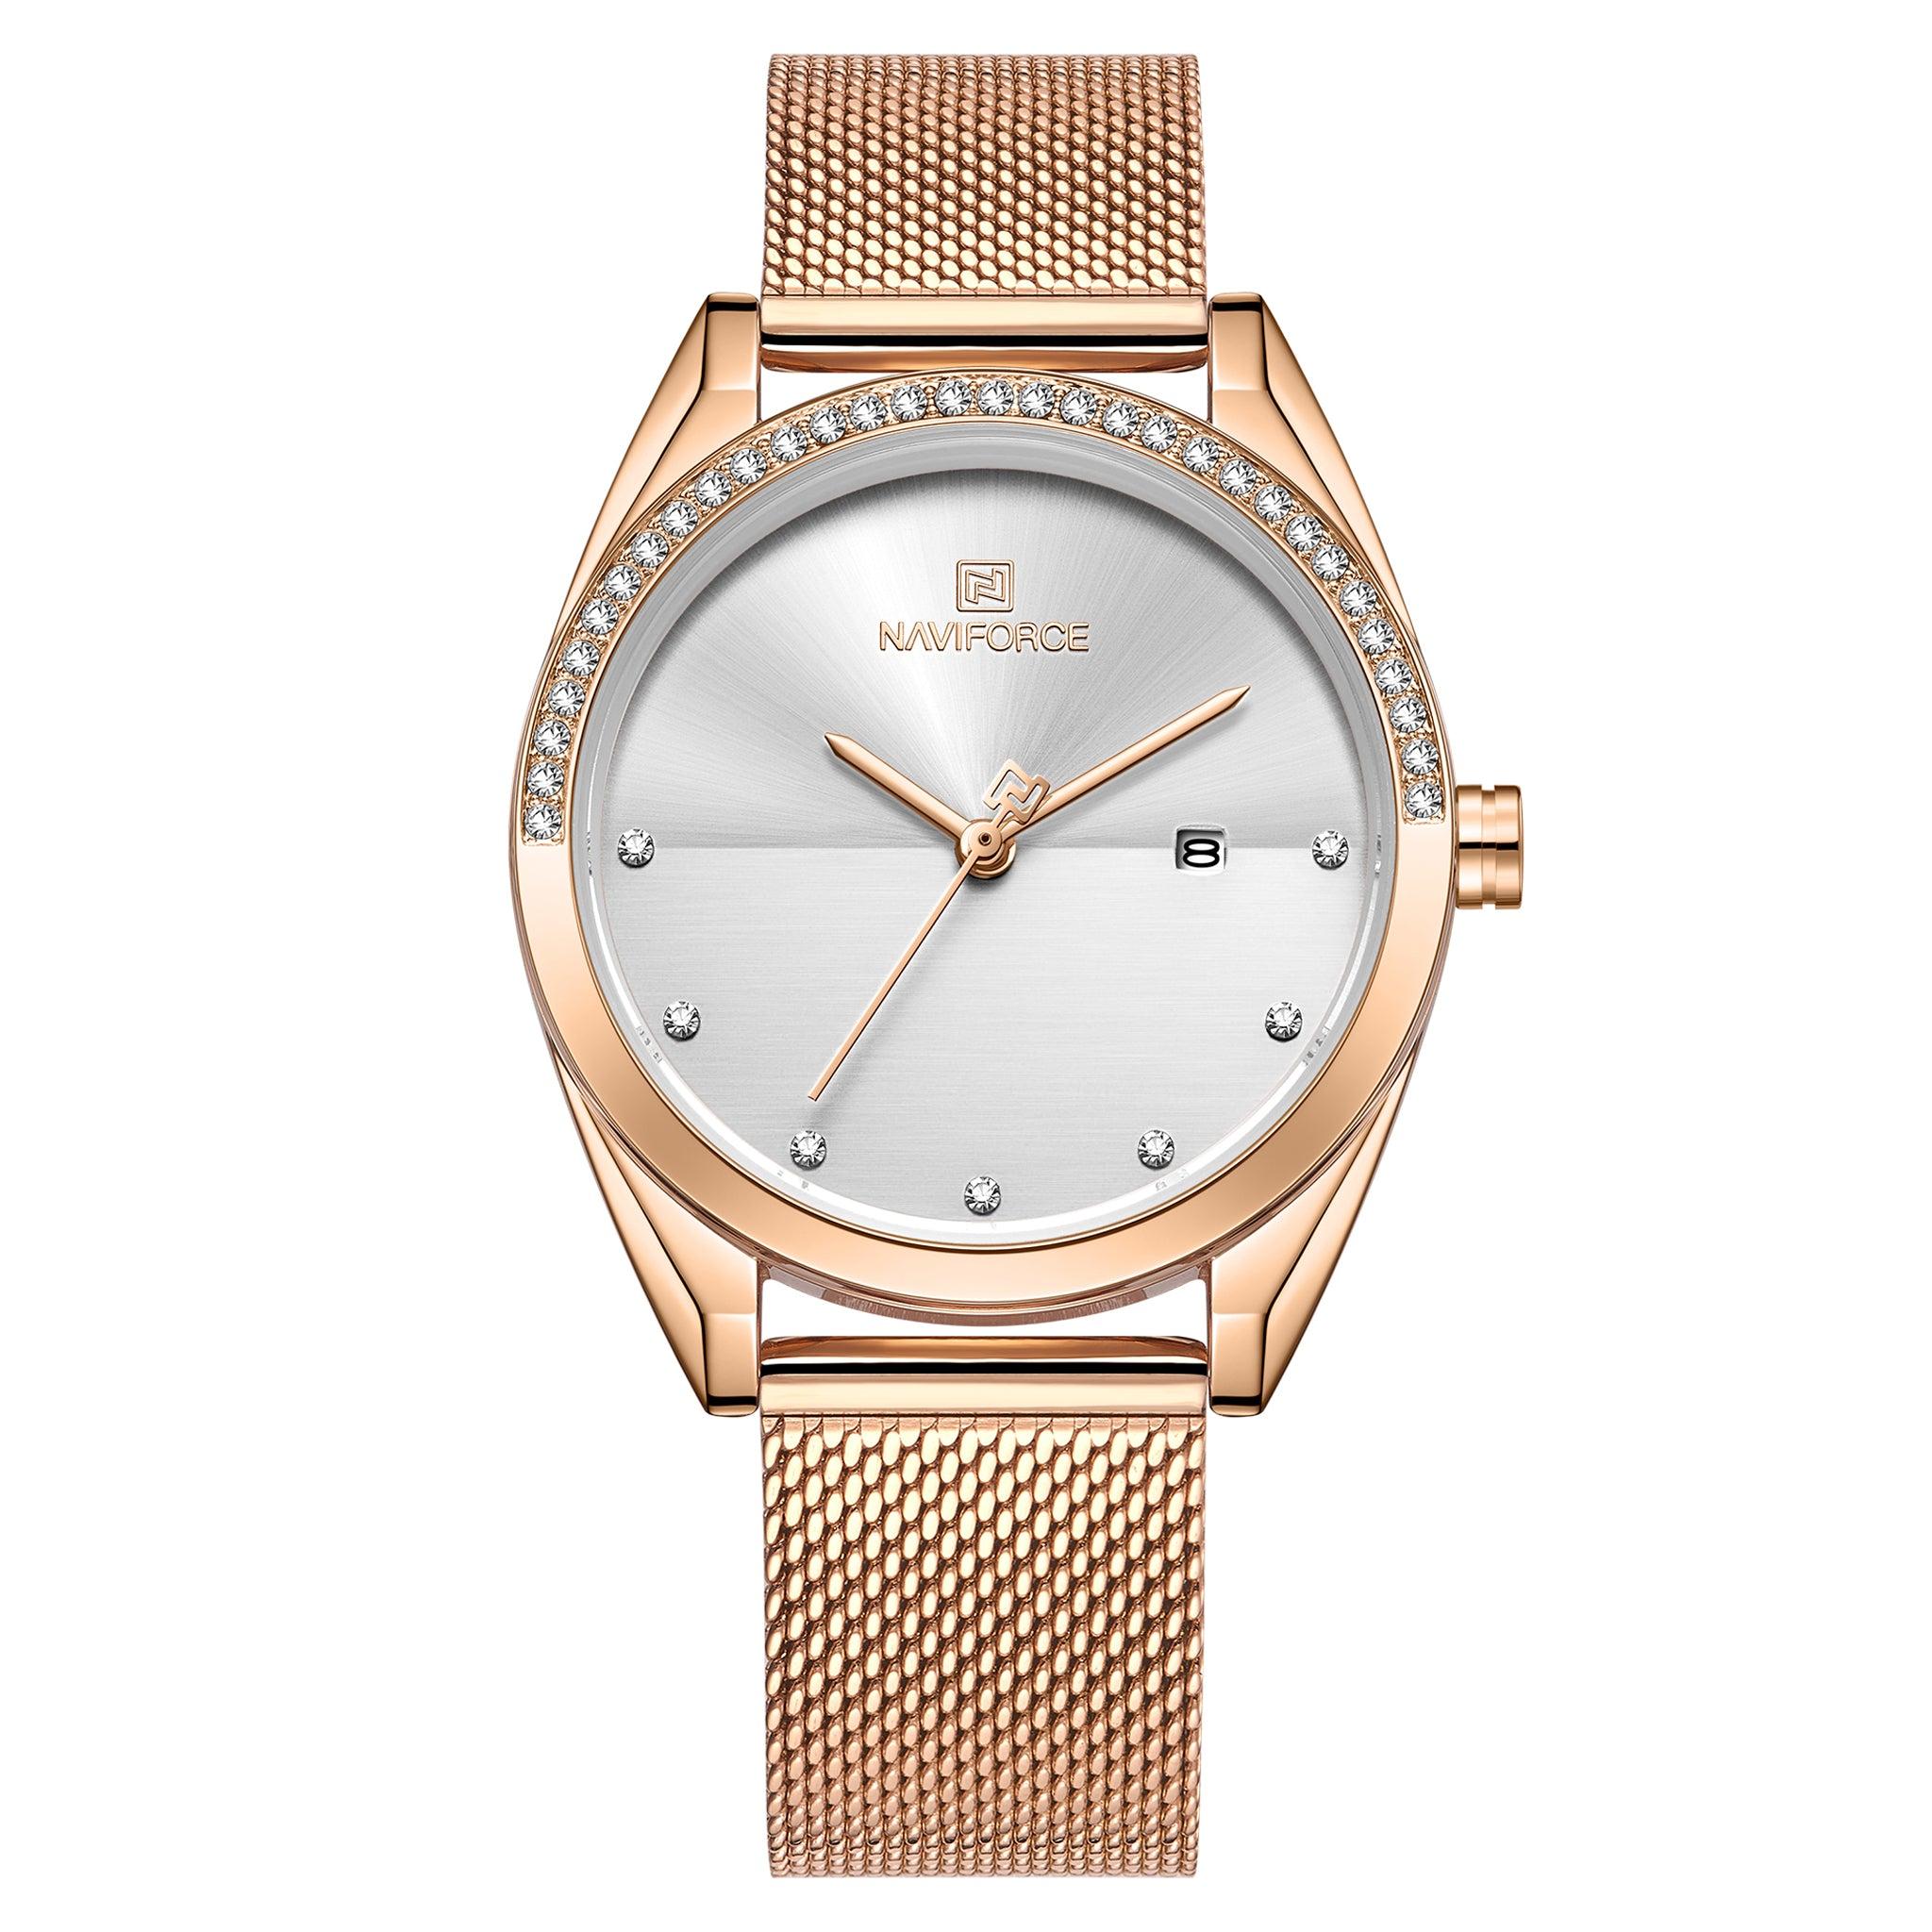 Naviforce Nf5015 Analog Rose Gold/ White Stainless Steel Watches For Women With Diamond Date Wristwatch